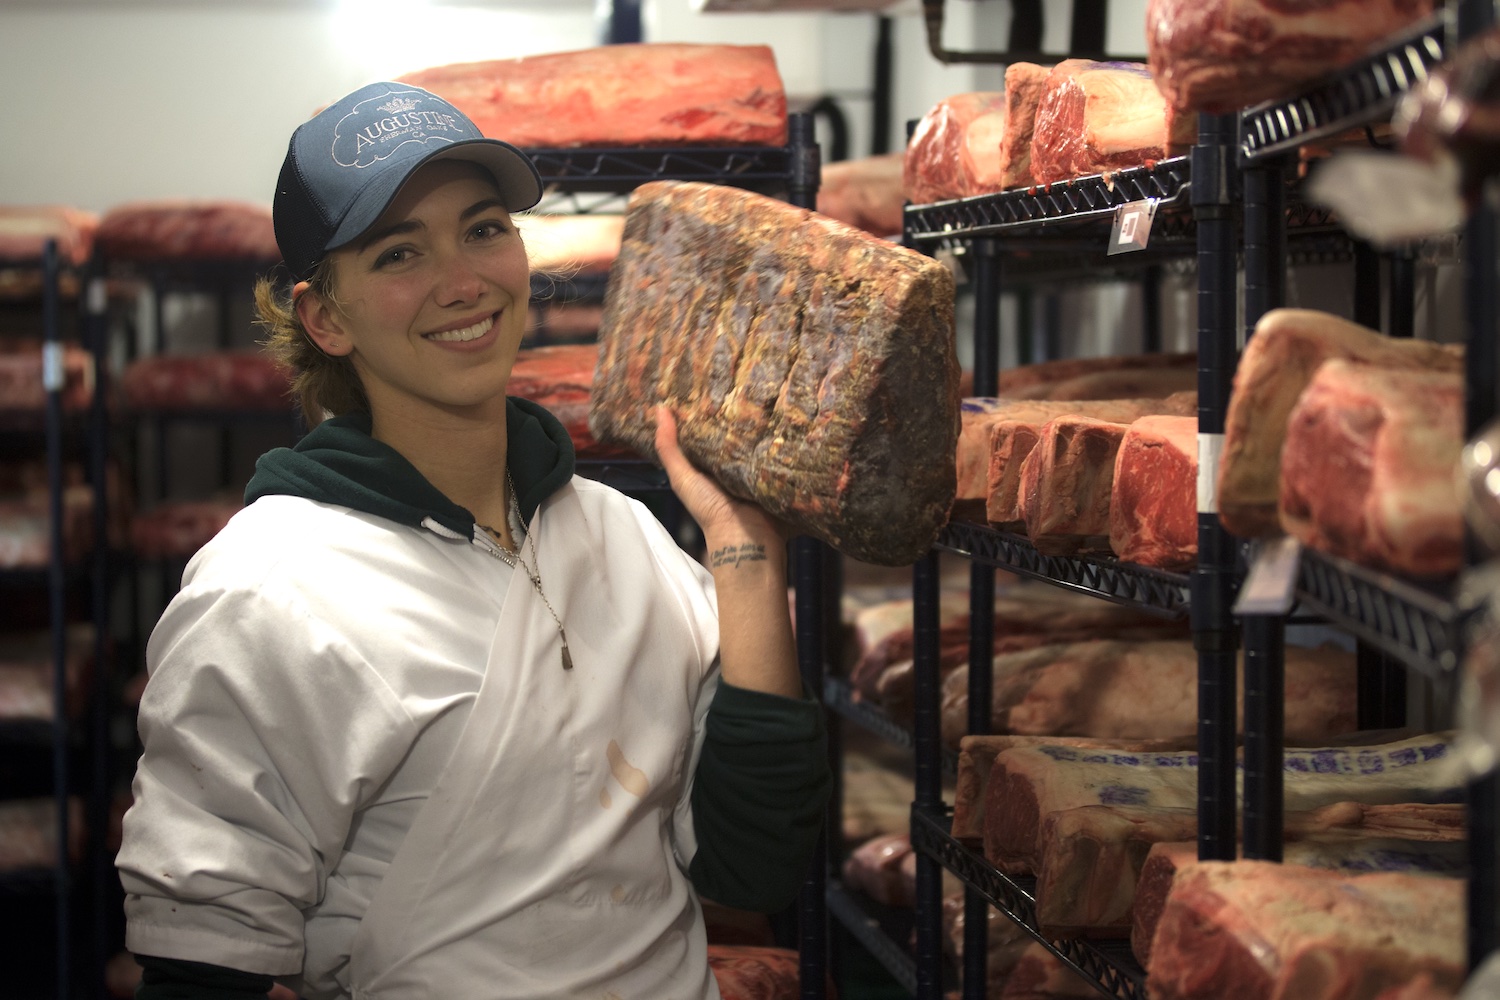 Katie Flannery posing with meat in her hand.